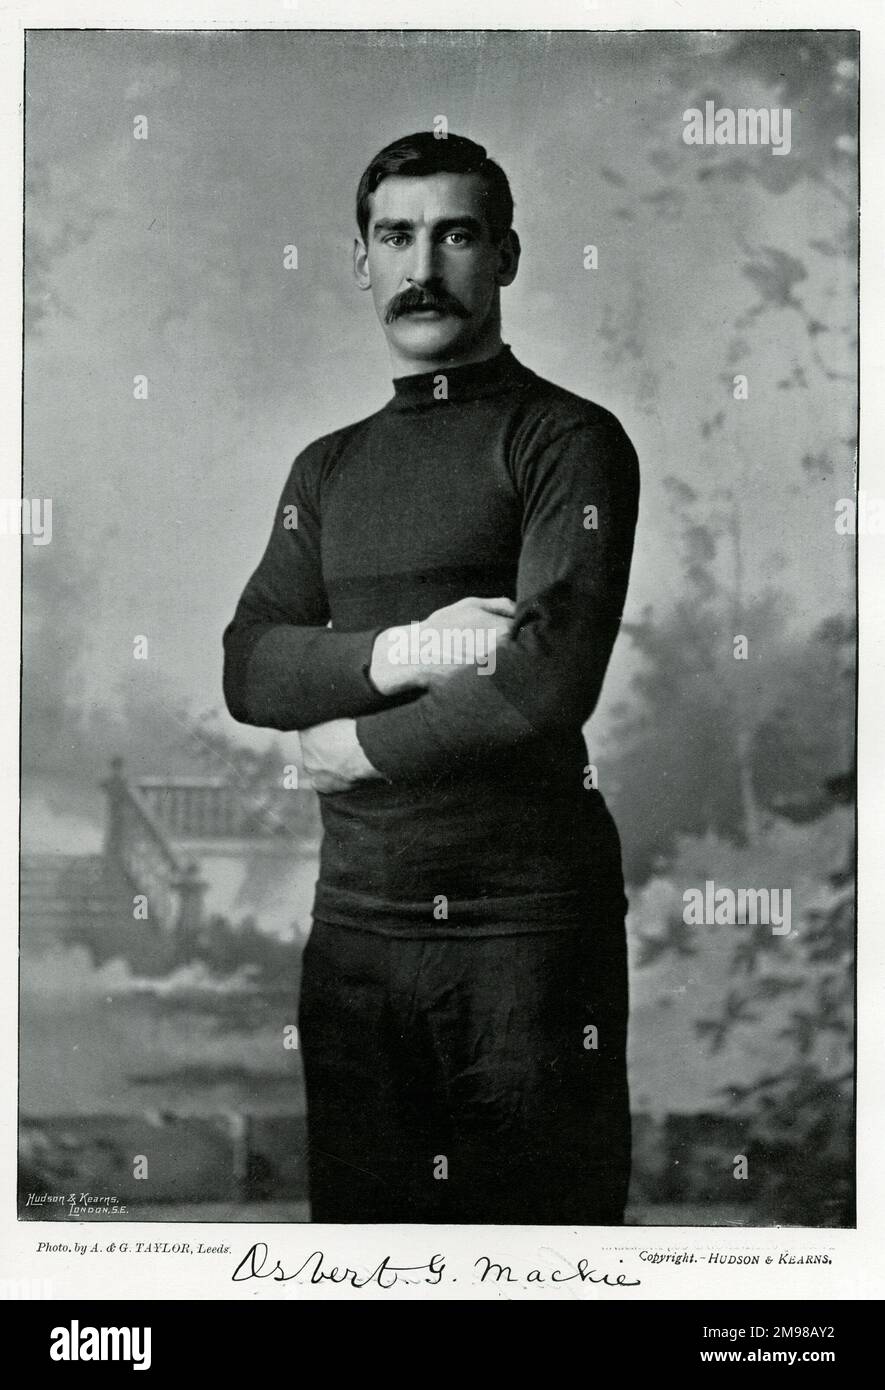 Osbert Gadesden Mackie (1869-1927), English Rugby union player and Anglican priest.  He played rugby for Wakefield Trinity, Cambridge University, Yorkshire, Barbarians, British Isles XV and England. Stock Photo